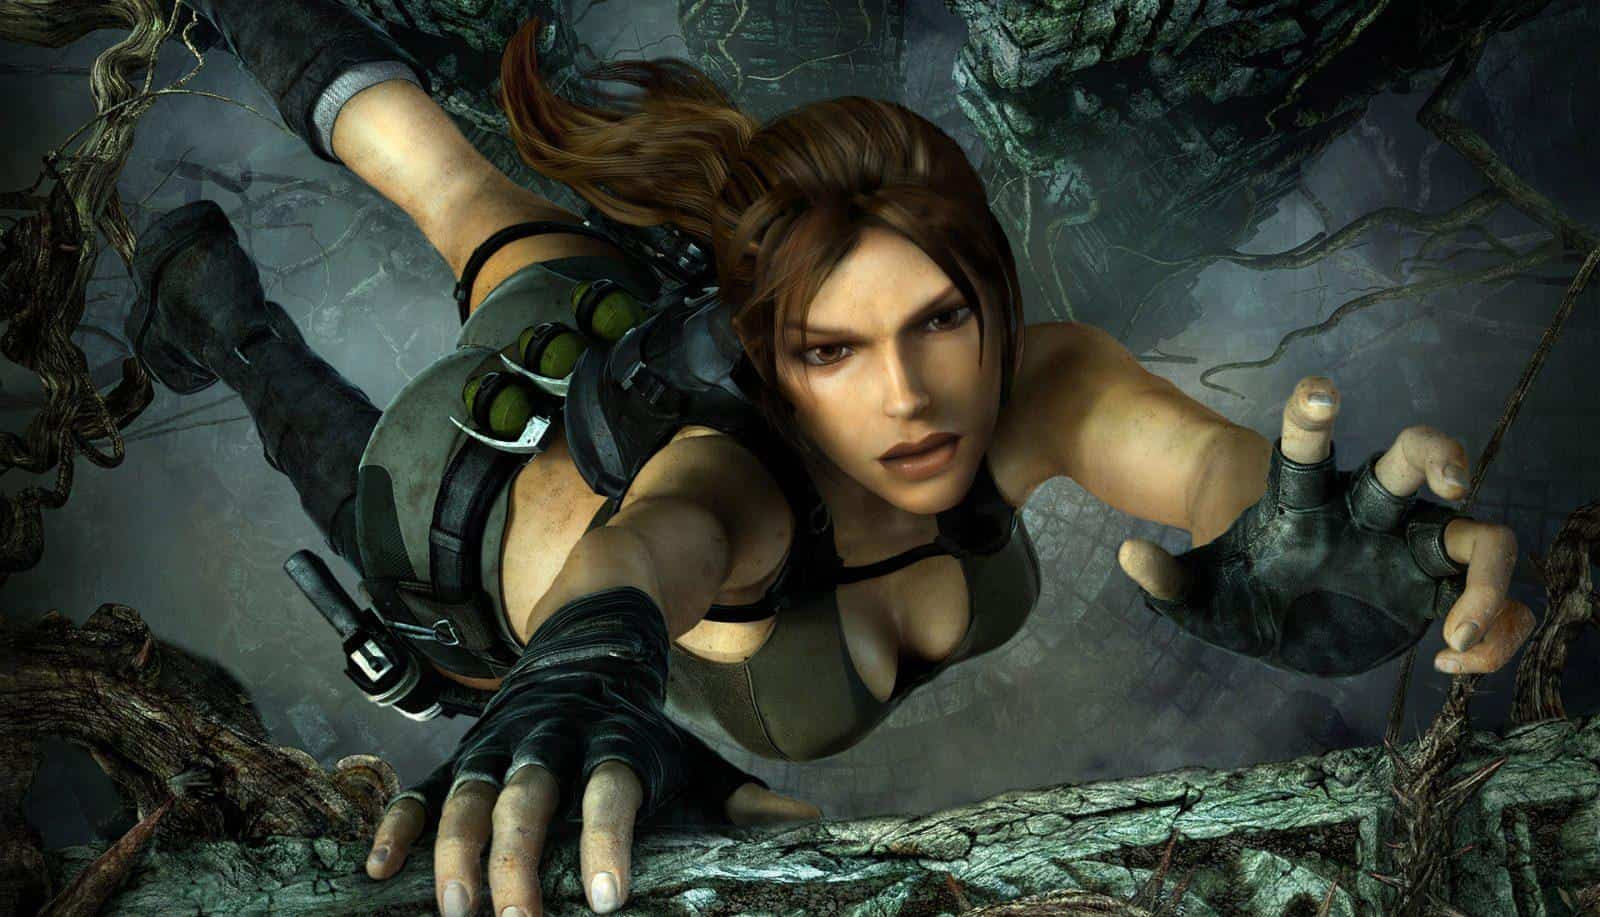 10 Things You (Probably) Didn’t Know About Tomb Raider